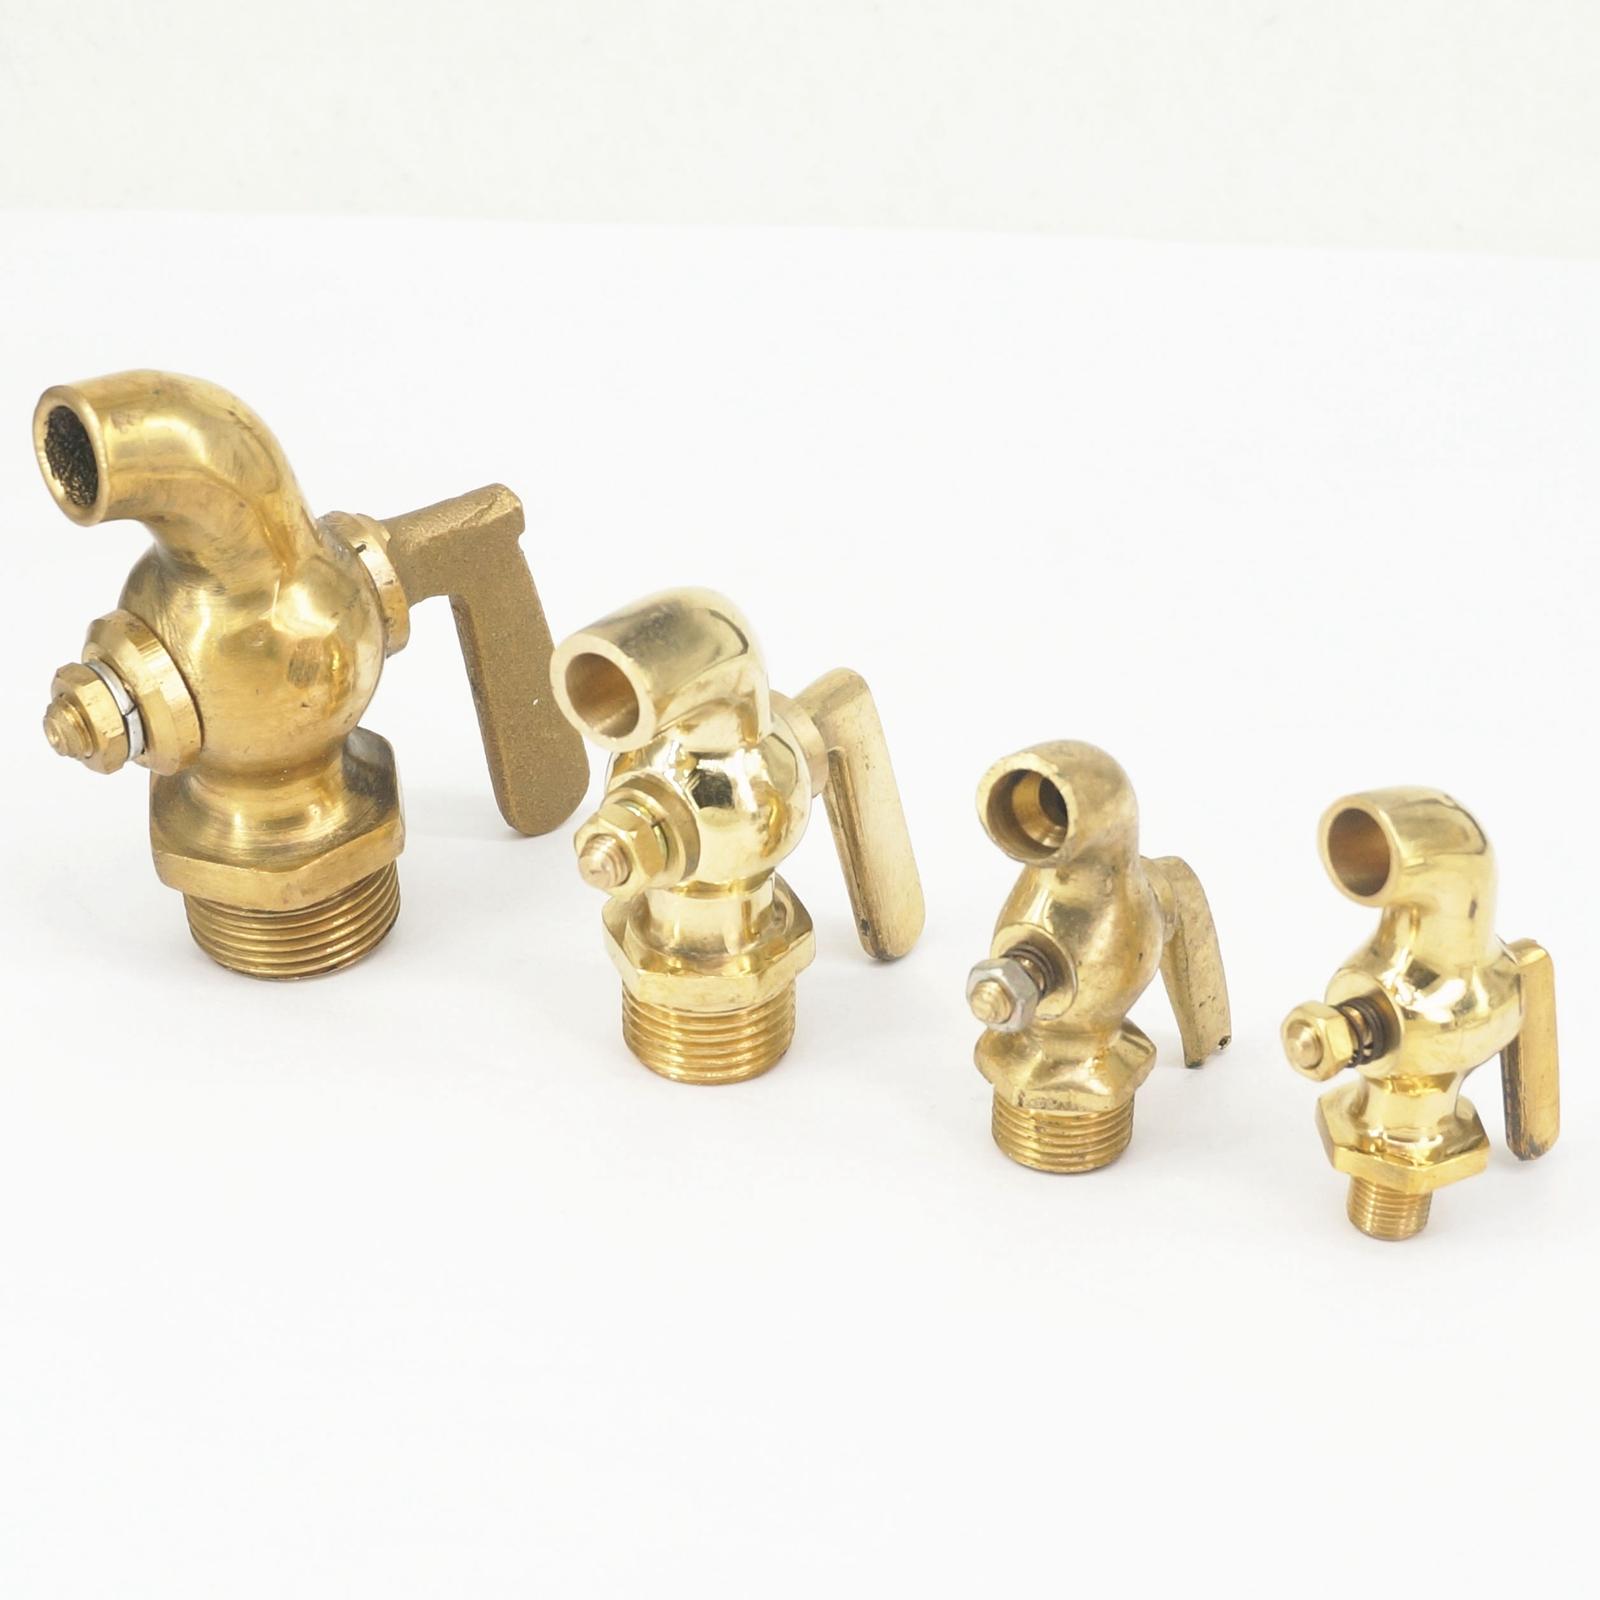 1/2" BSP Male Small-Type Hot Water Tap Brass Handle Faucet For Tea-furnace 